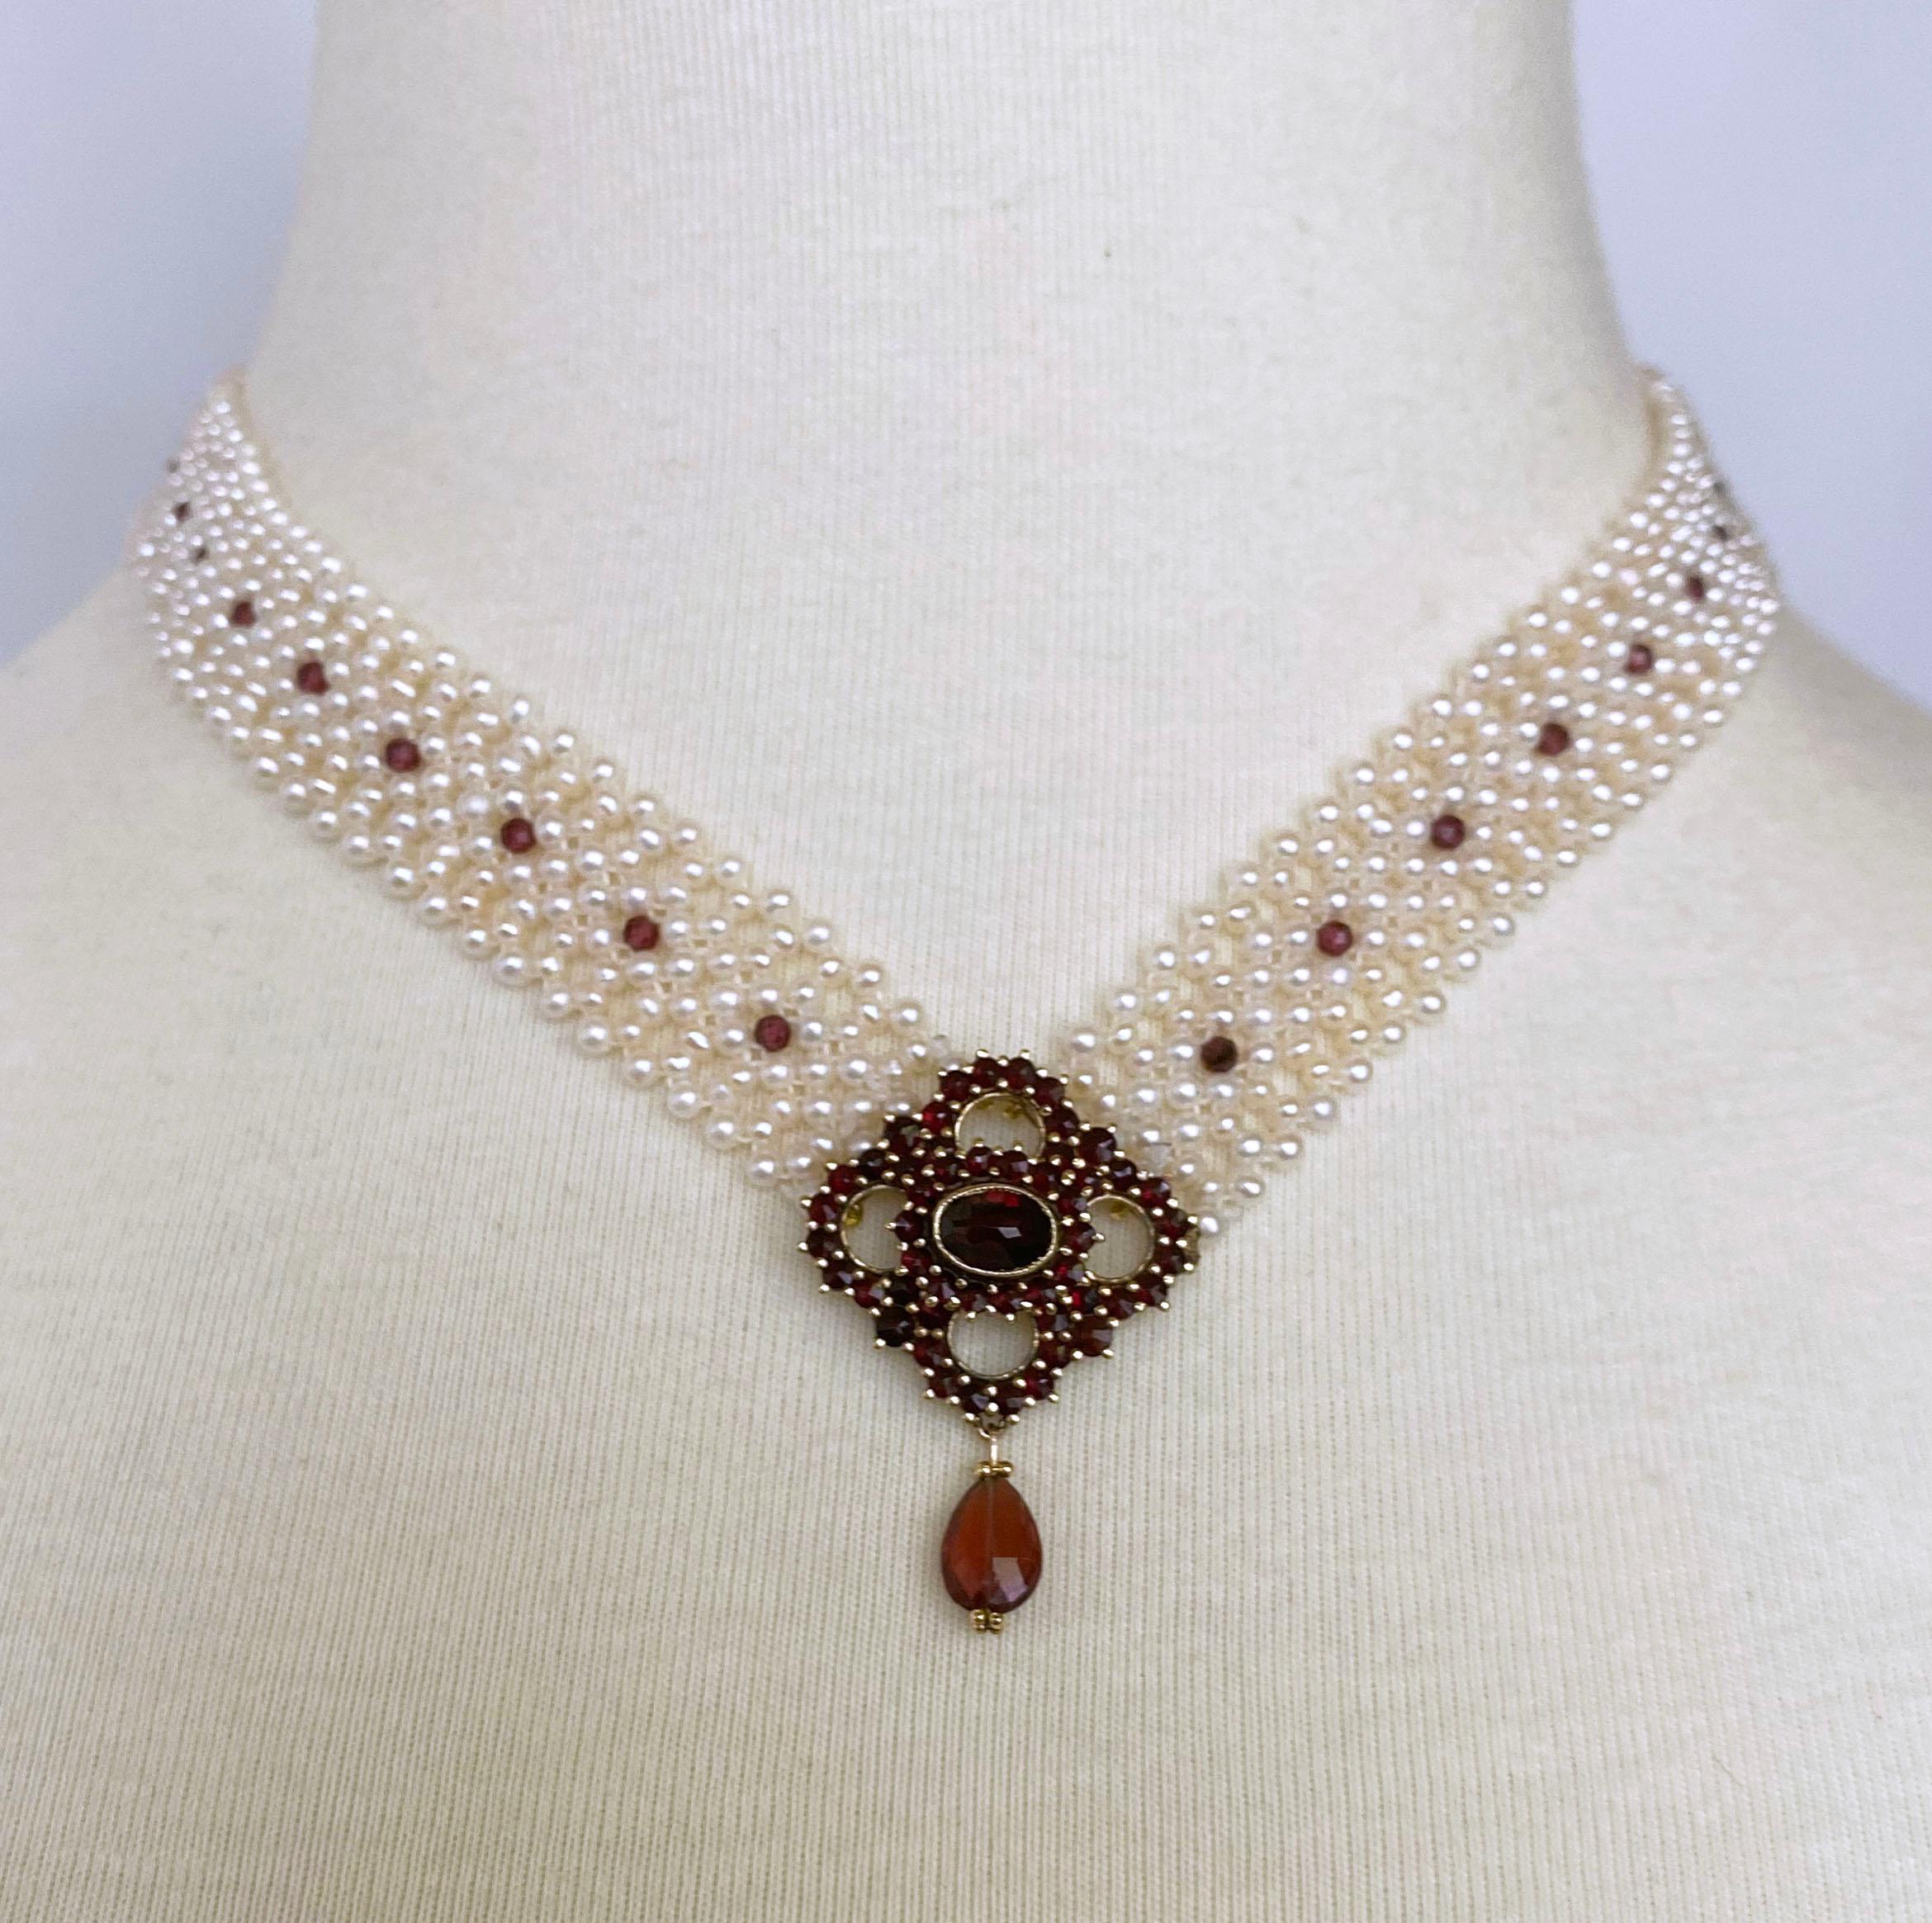 Bead Marina J. All Pearl Woven Necklace with Vintage Garnet Centerpiece For Sale